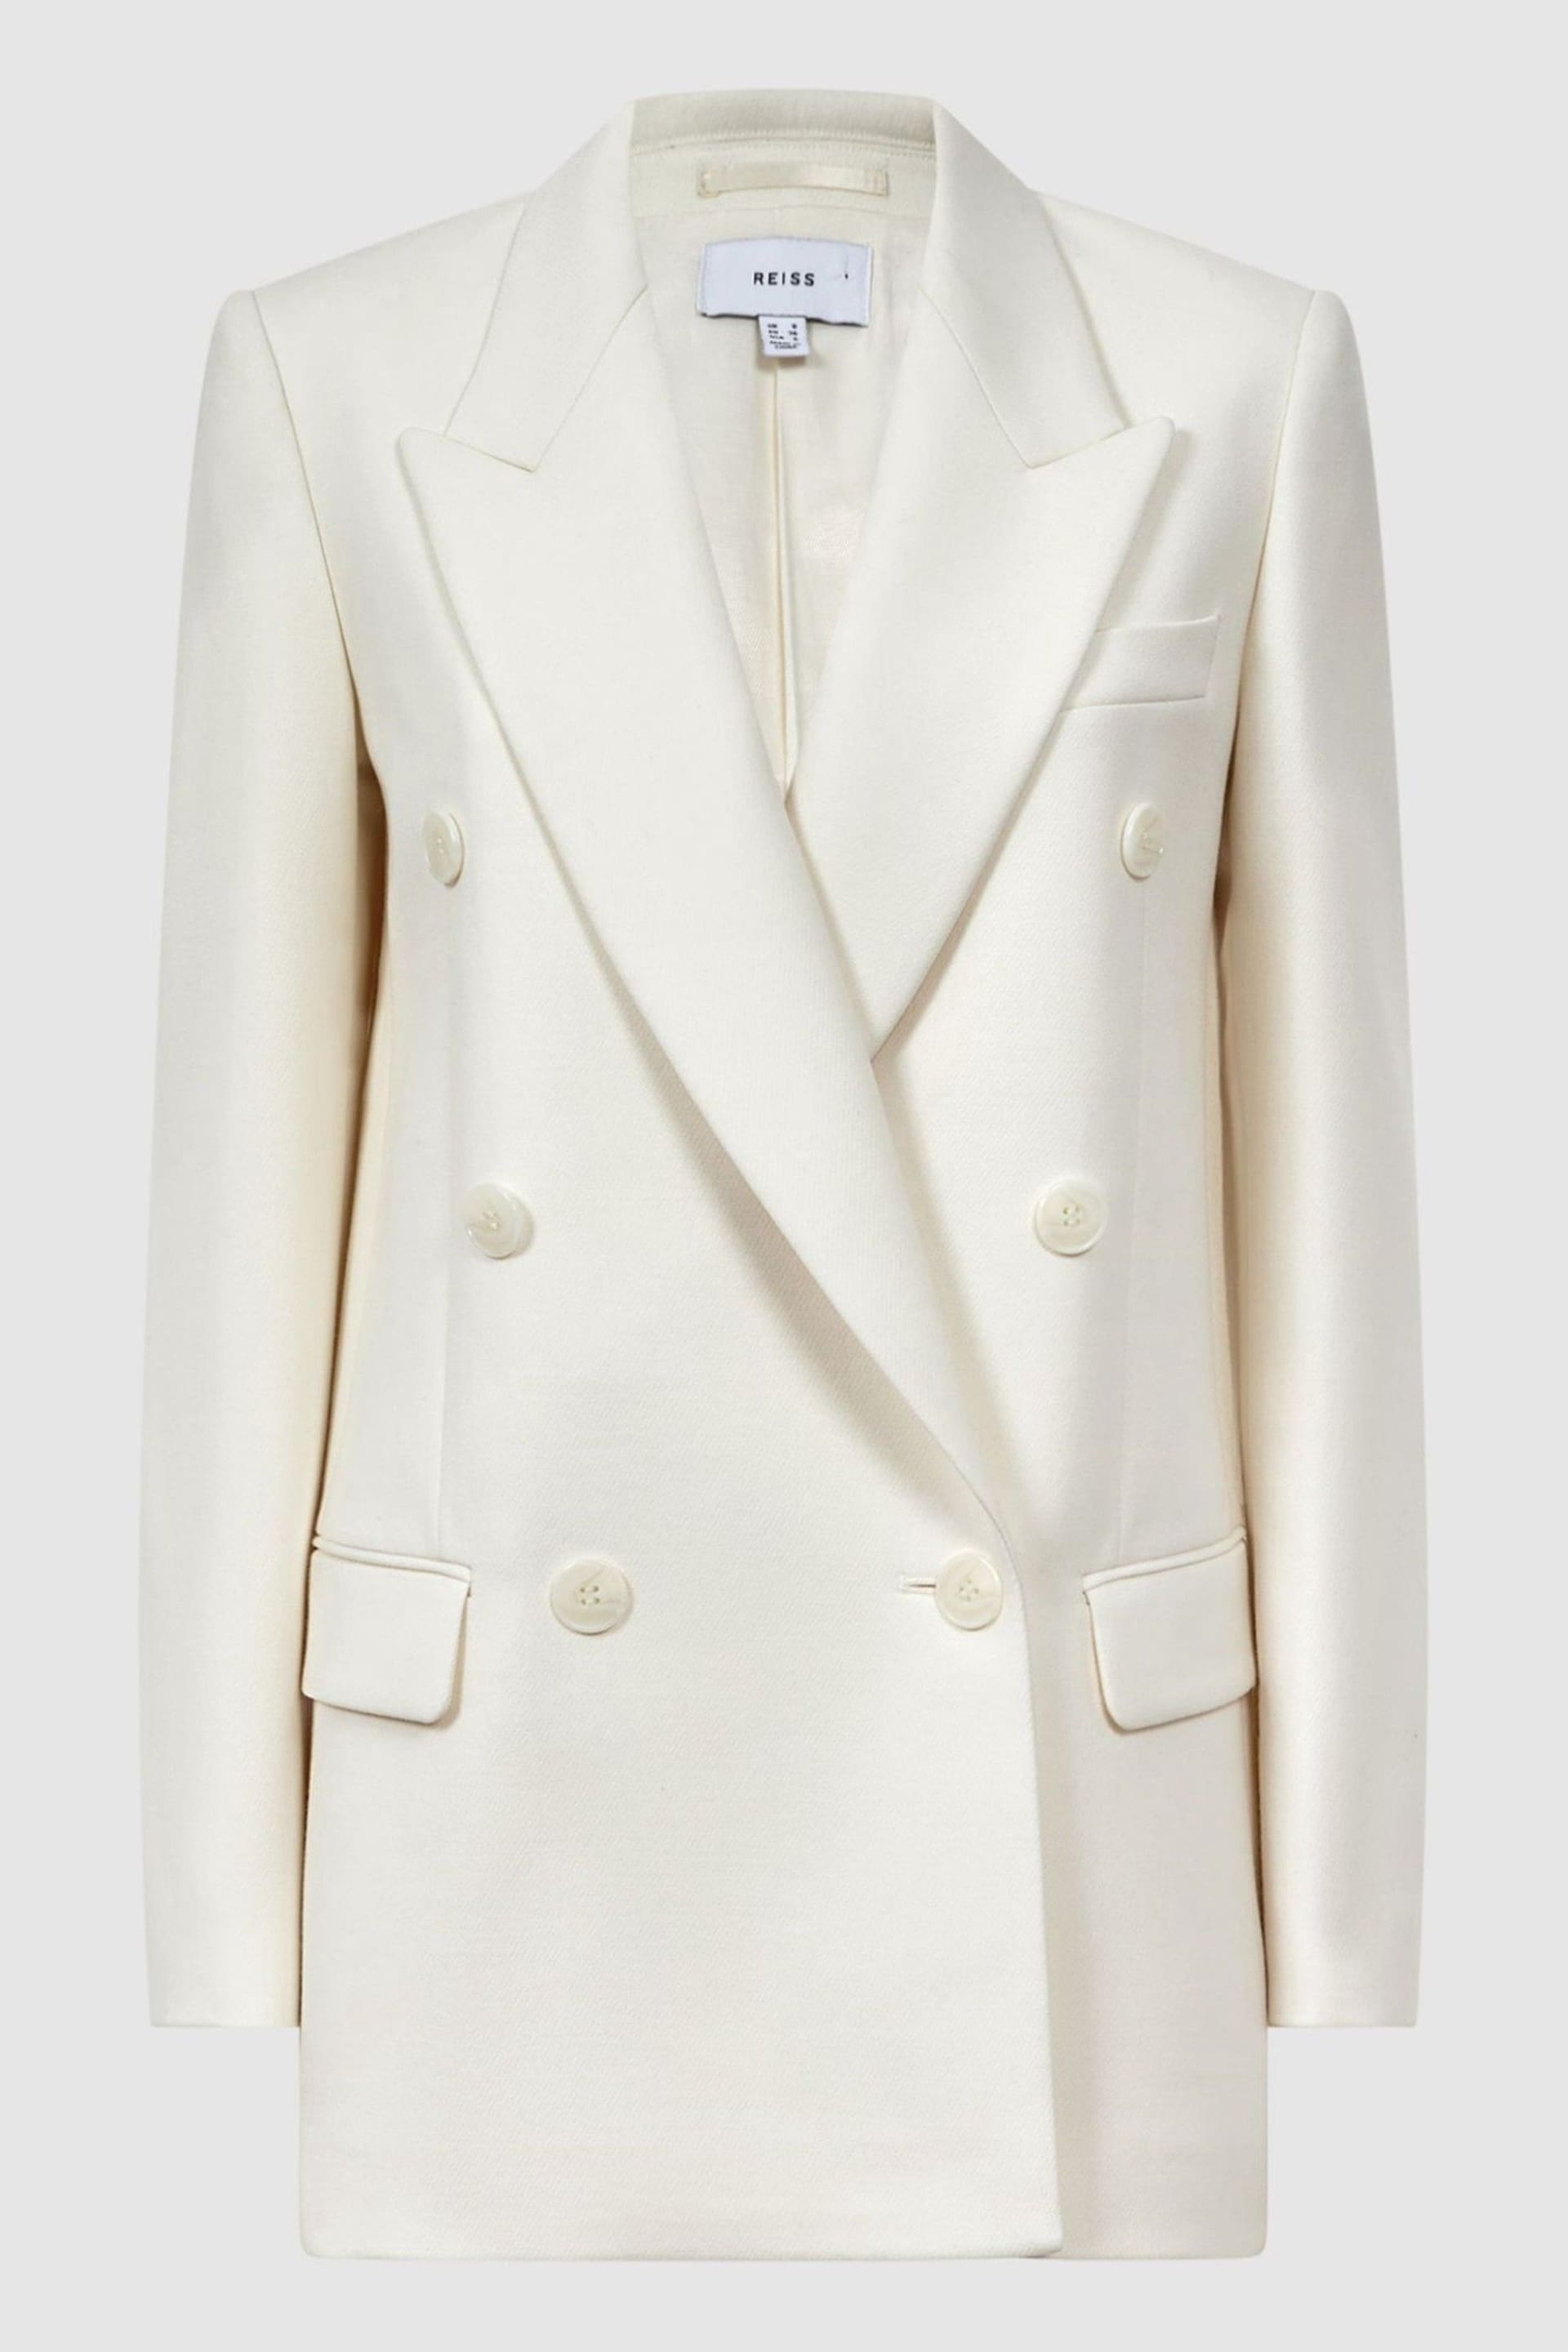 Reiss White Mabel Modern Fit Wool Double Breasted Blazer - Image 2 of 7